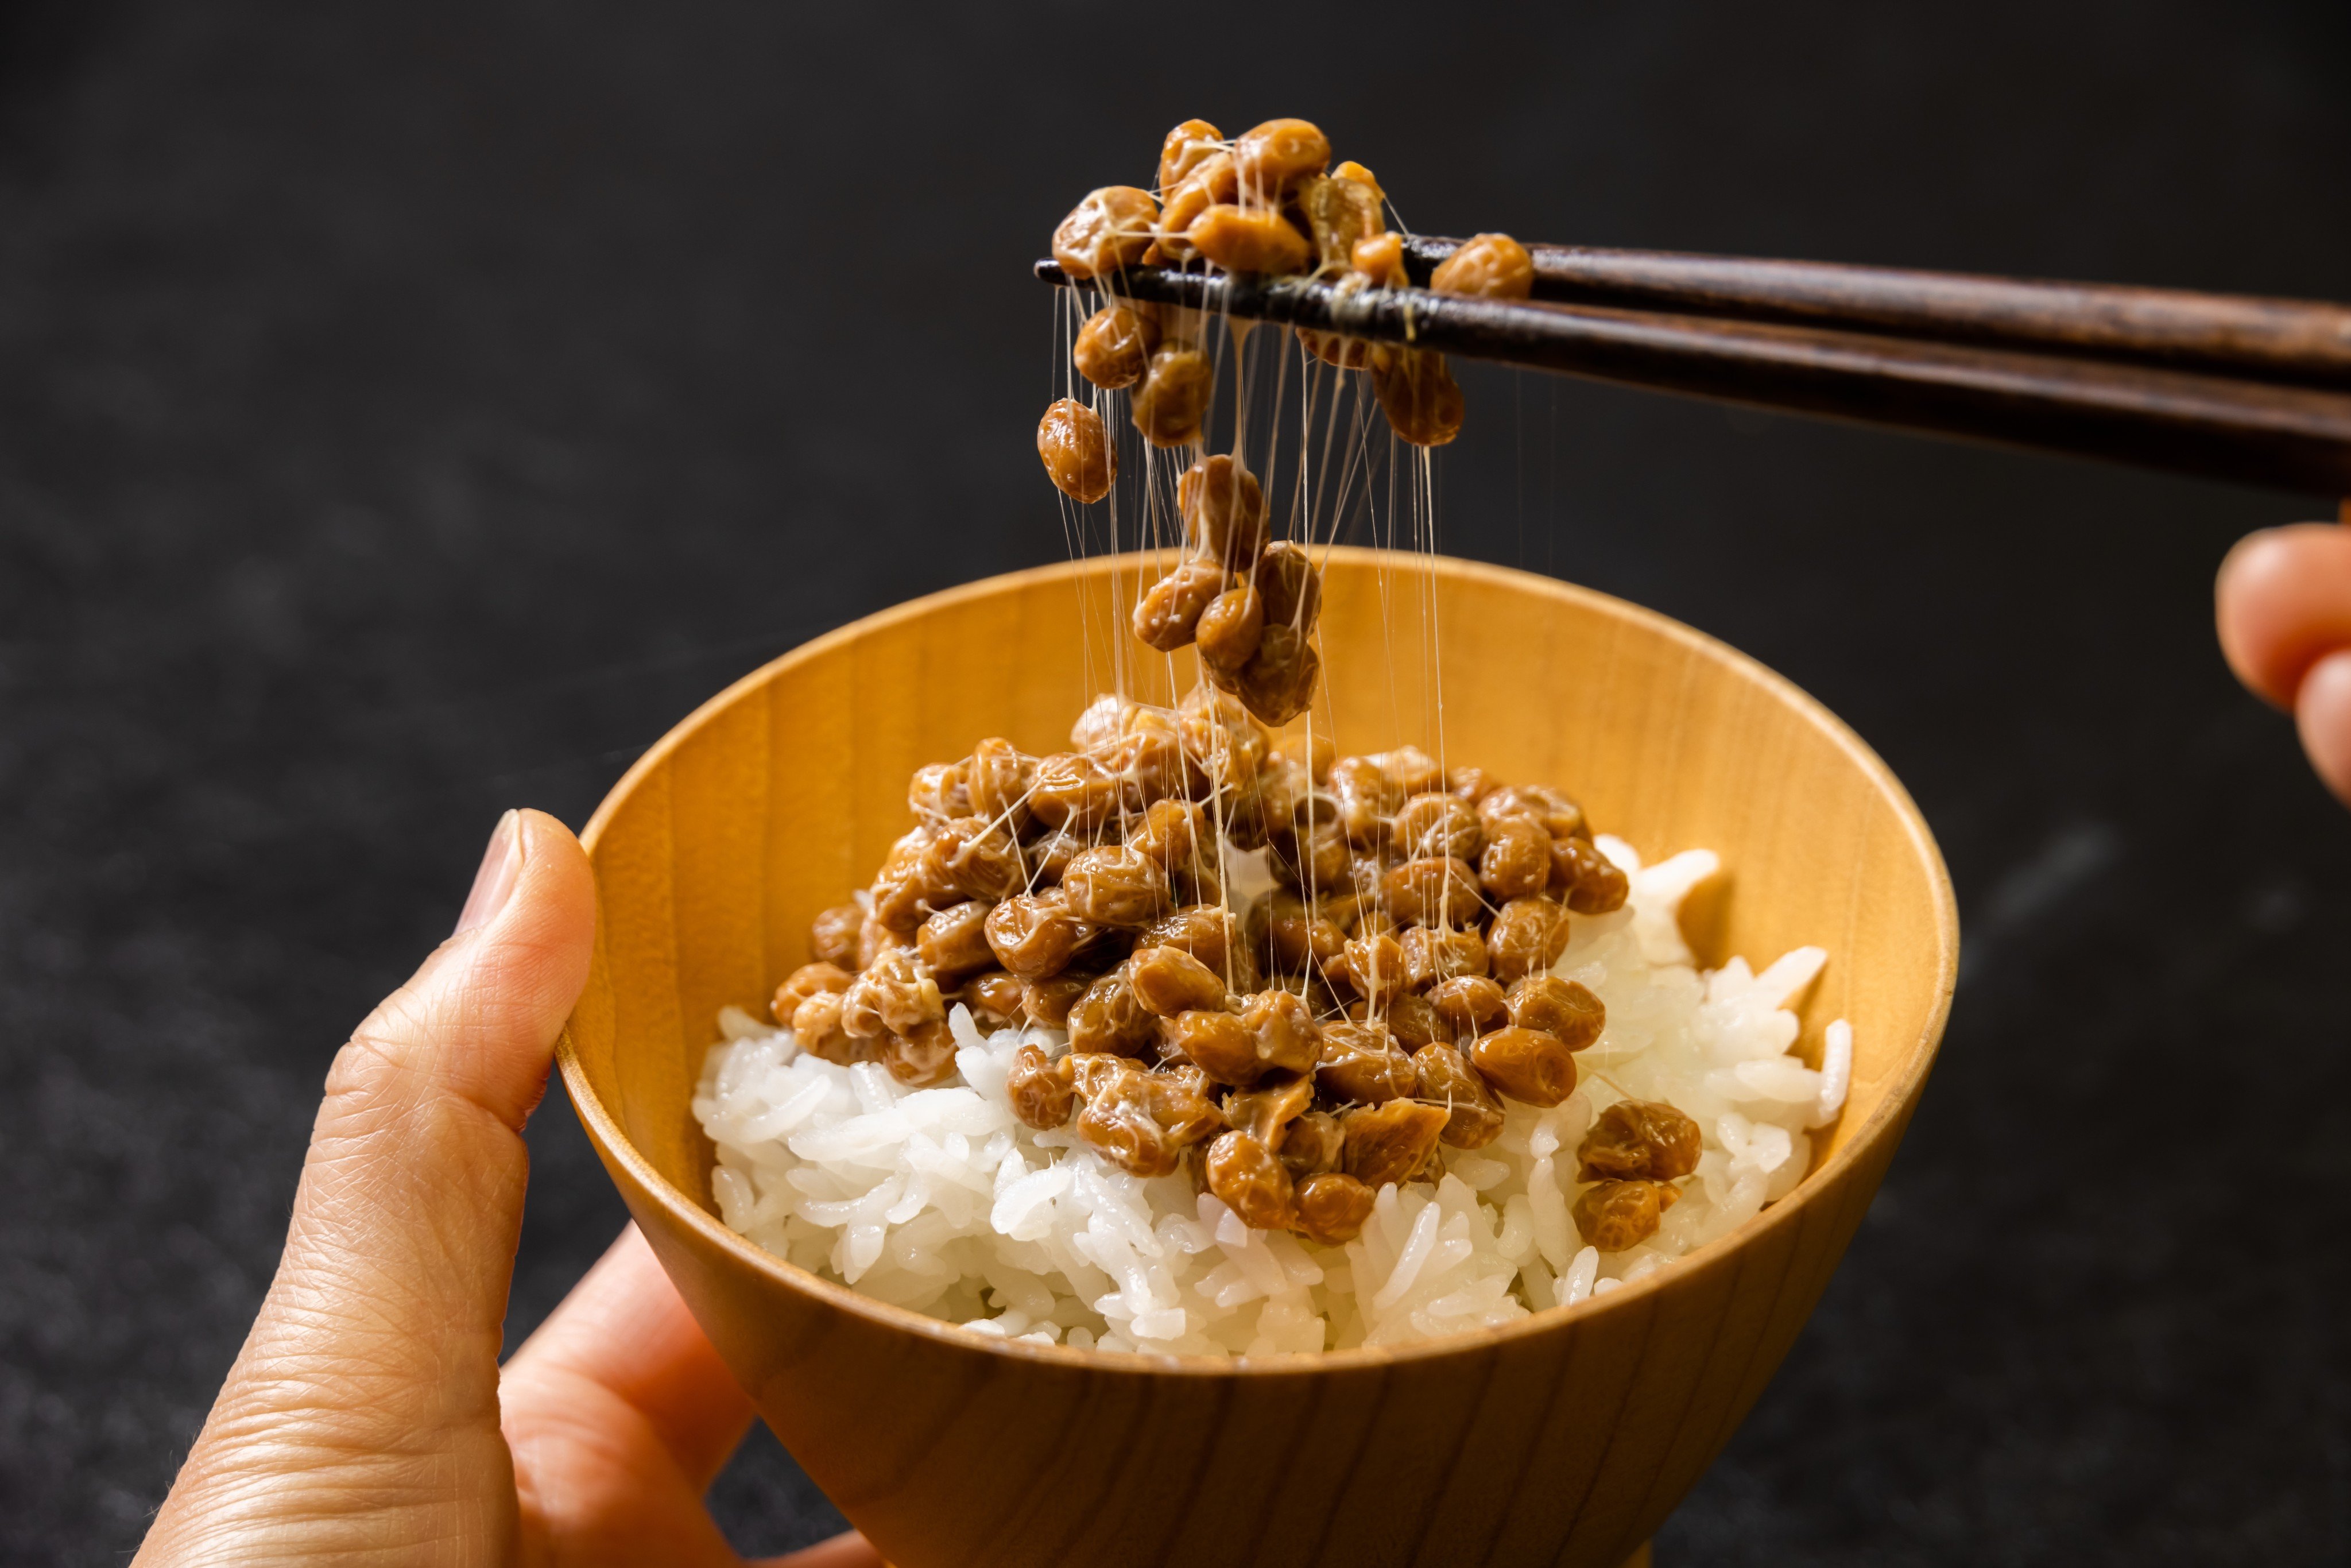 Natto is widely consumed in Japan as a budget superfood, but the fermented soybeans’ pungent aroma and wildly sticky texture are not for everyone. Photo: Shutterstock